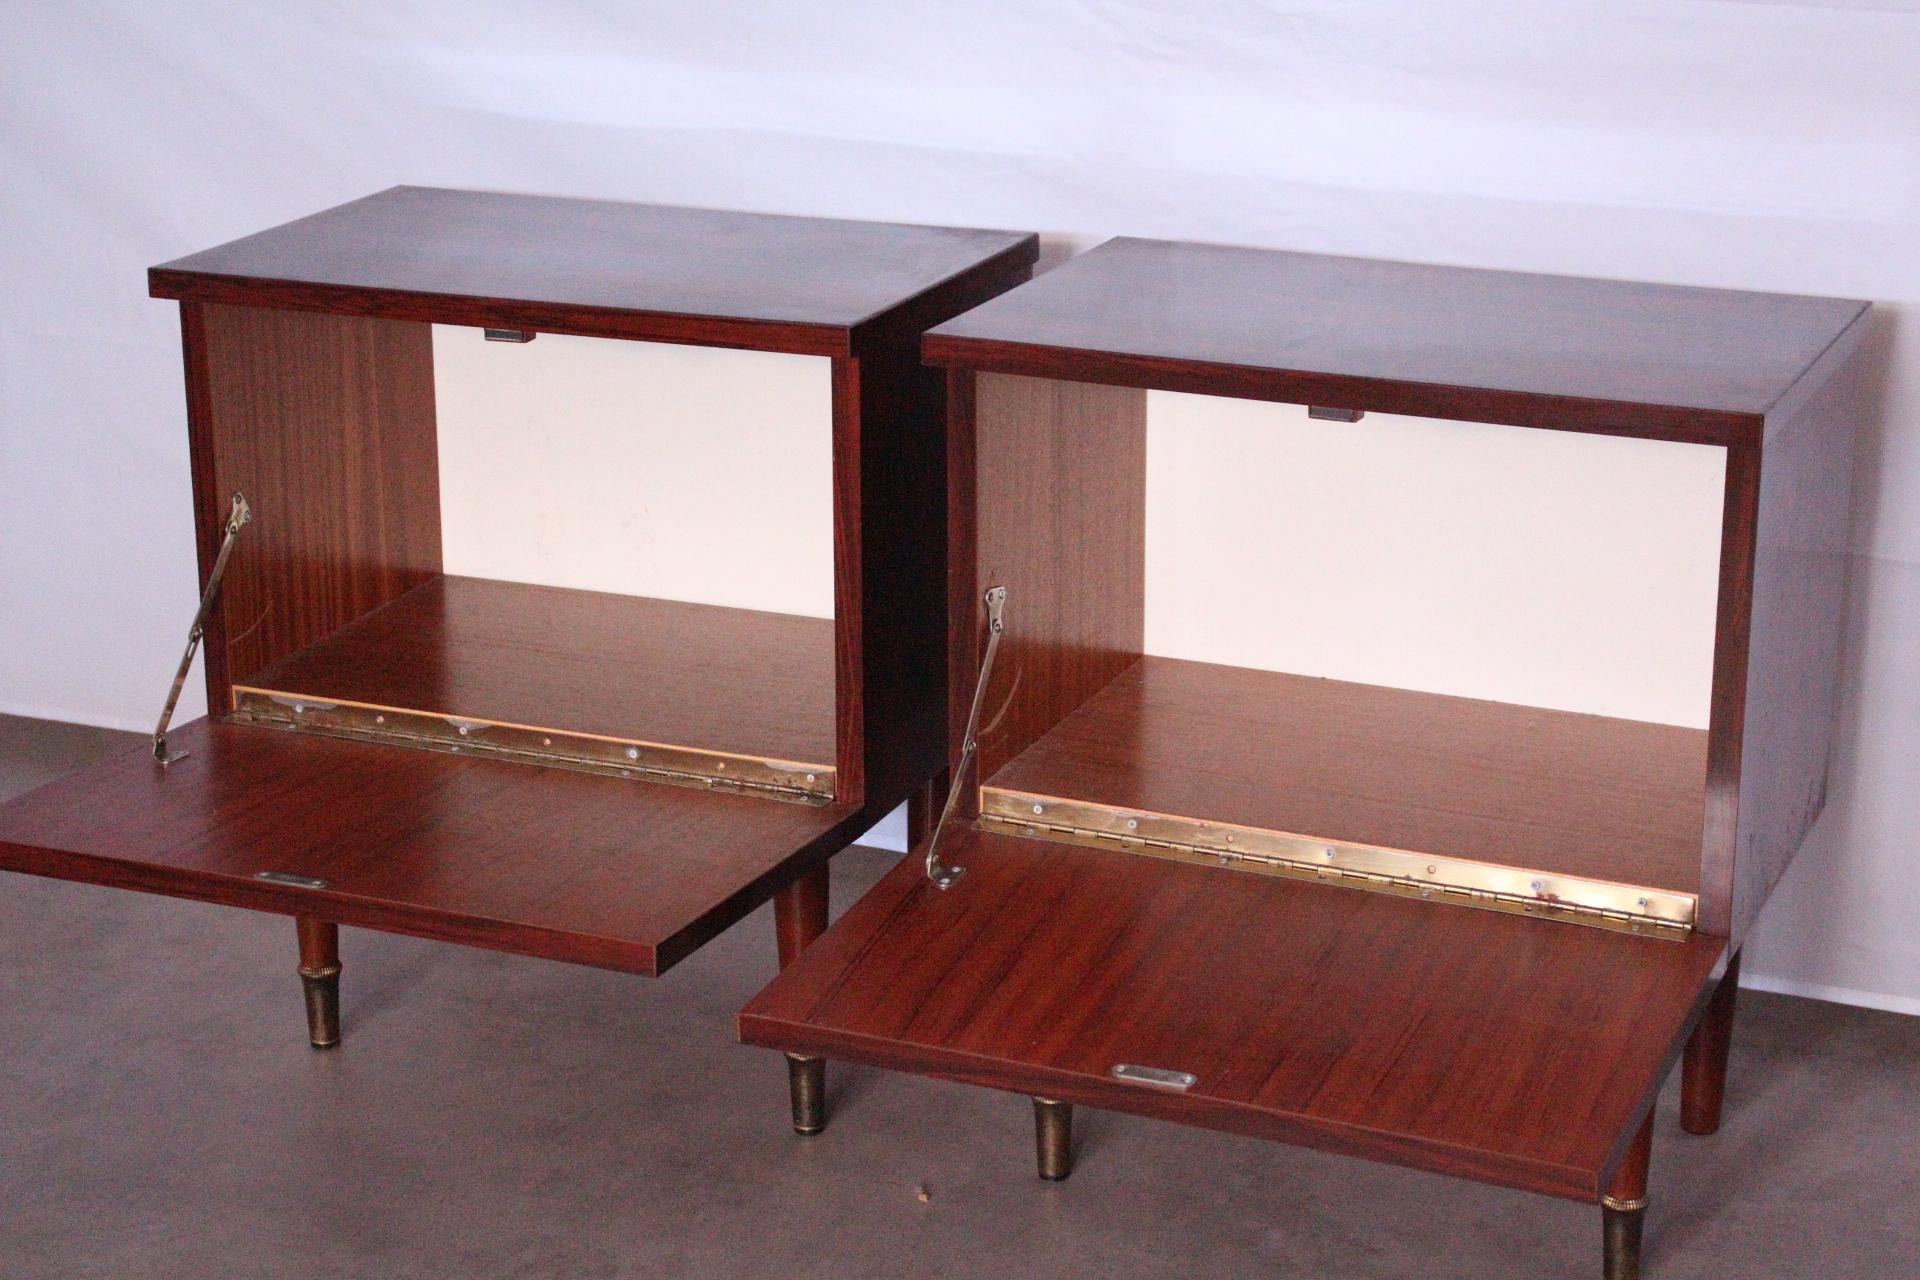 Wood Pair of Midcentury Nightstands French, circa 1970 Side Cabinets Bedside Tables